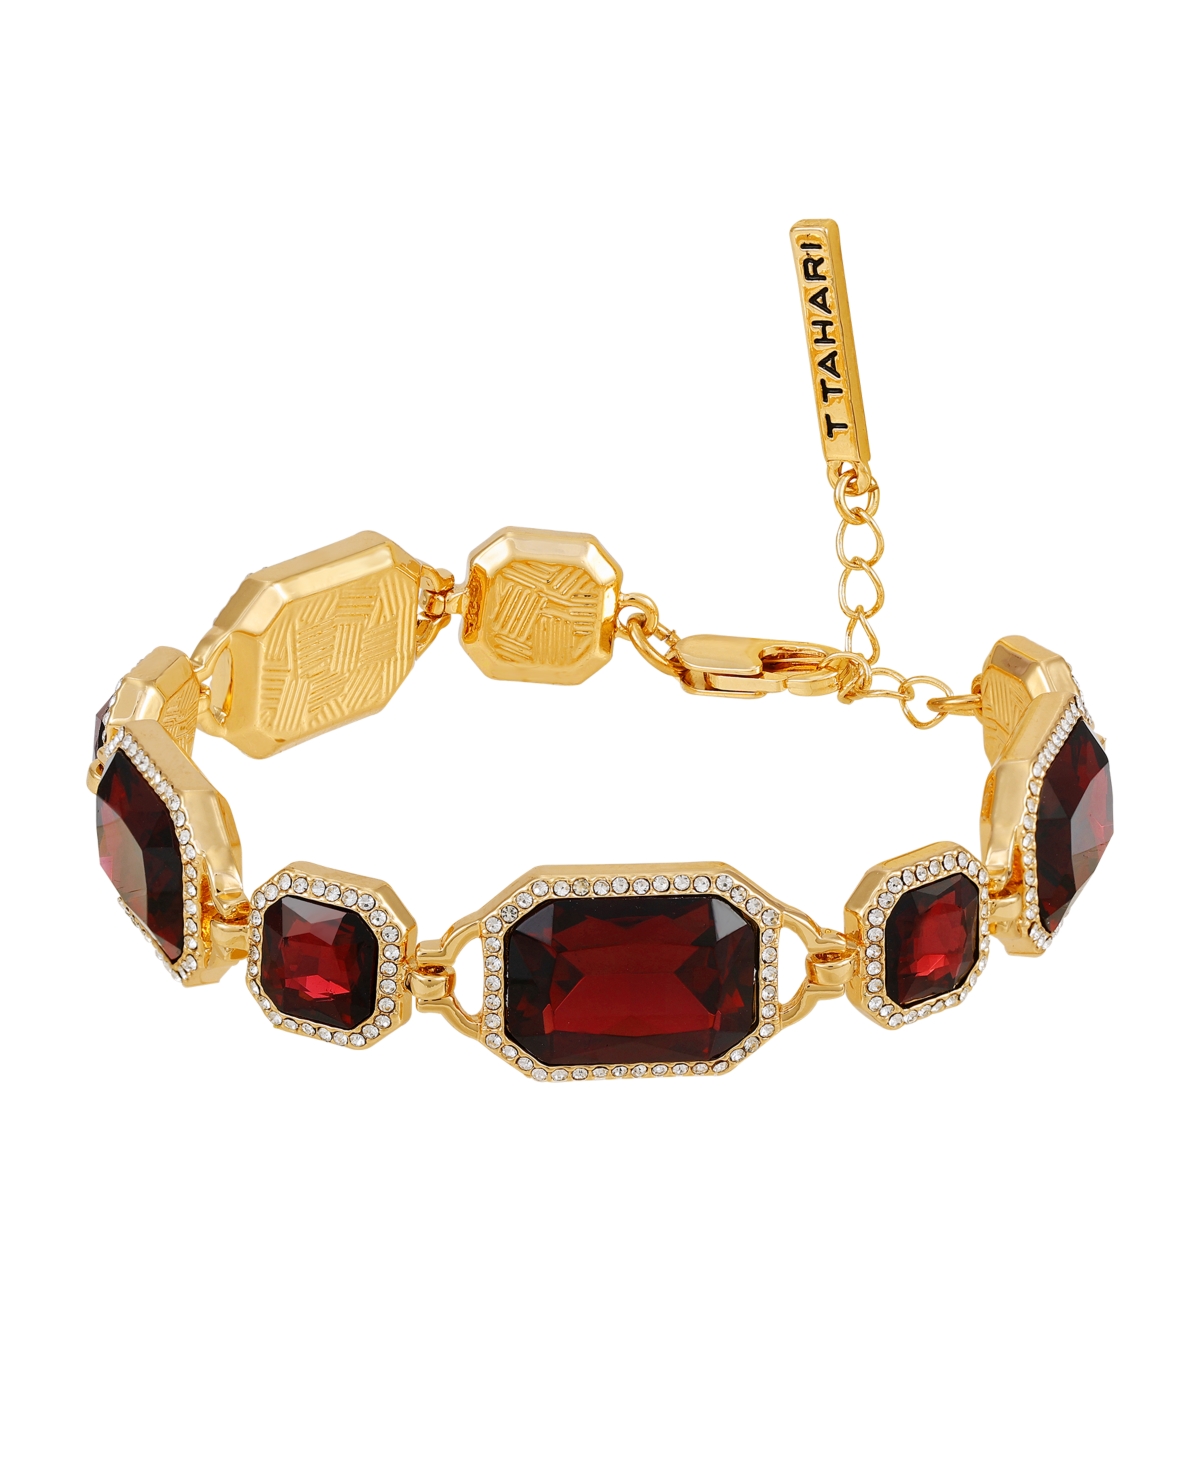 Gold-Tone and Dark Red Glass Stone Line Bracelet - Gold